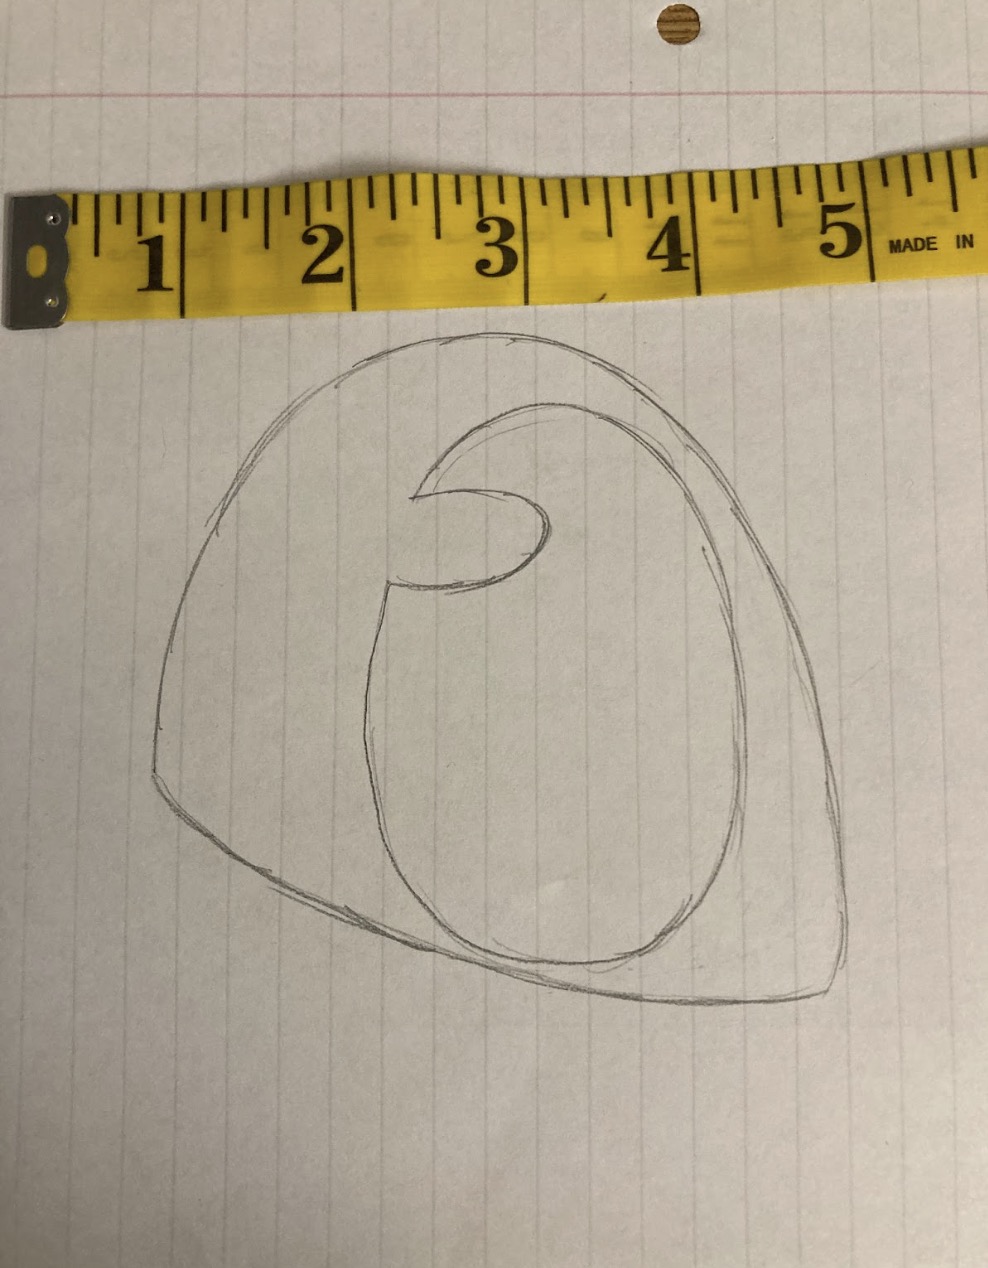 Drawing of a fursuit eye with a measuring tape next to it